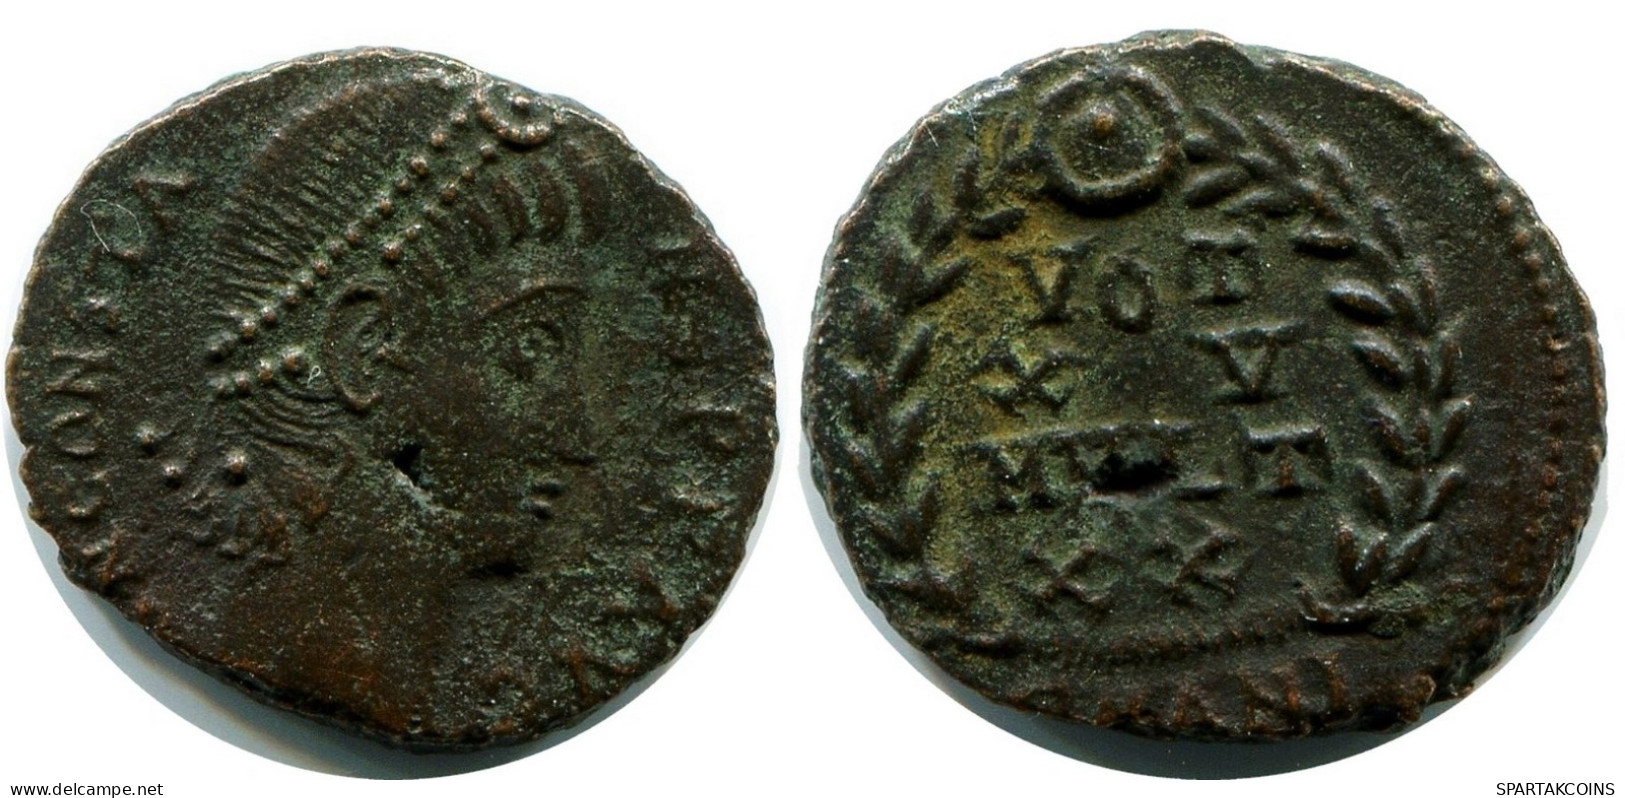 CONSTANS MINTED IN ANTIOCH FOUND IN IHNASYAH HOARD EGYPT #ANC11821.14.F.A - The Christian Empire (307 AD Tot 363 AD)